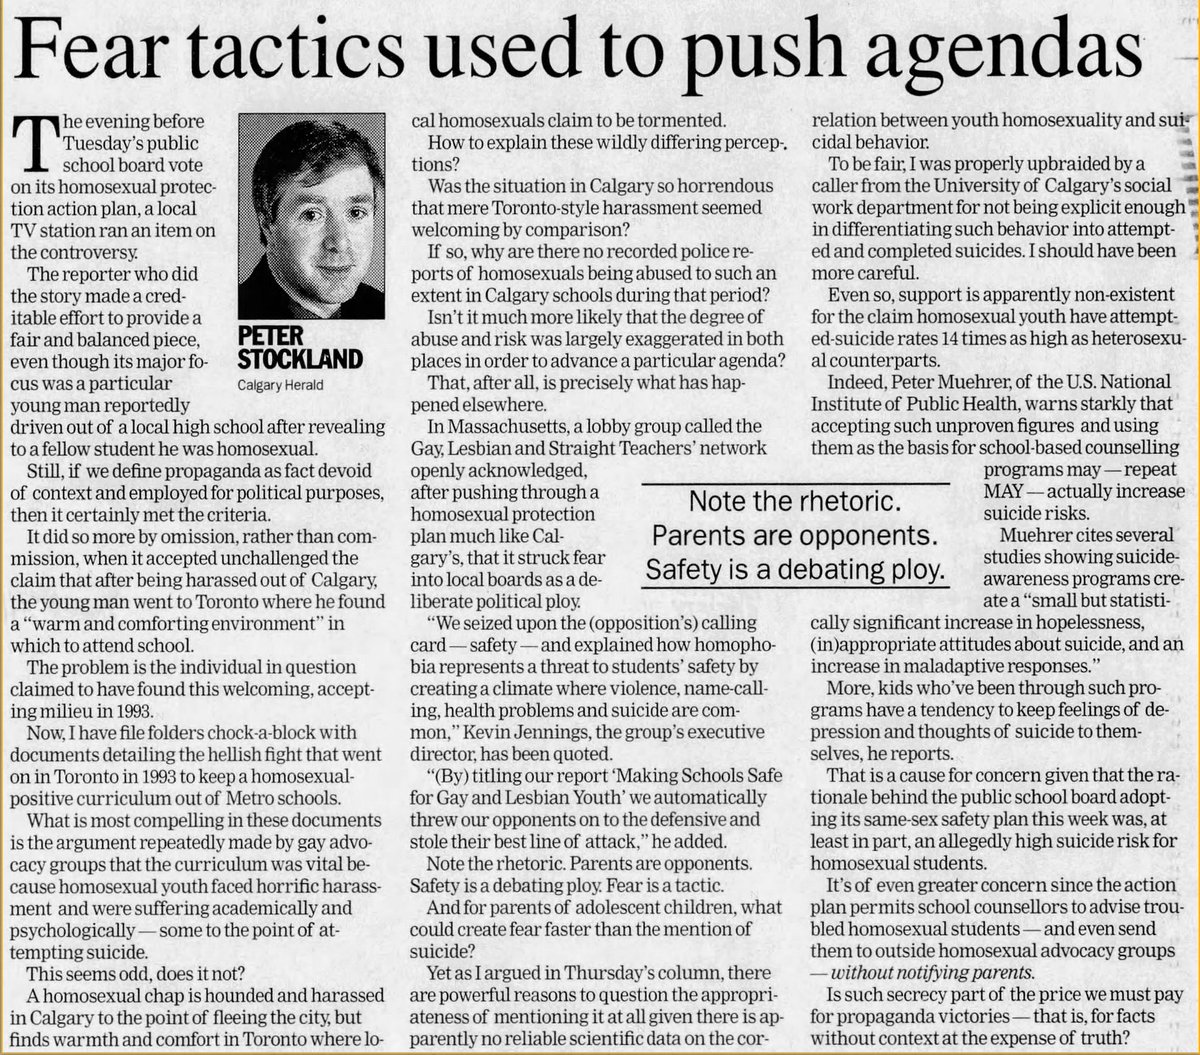 Transgender activists...er...Homosexuals are lying about suicide stats to push agendaCalgary Herald, Canada 1997-02-28"Note the rhetoric. Parents are opponents. Safety is a debating ploy."